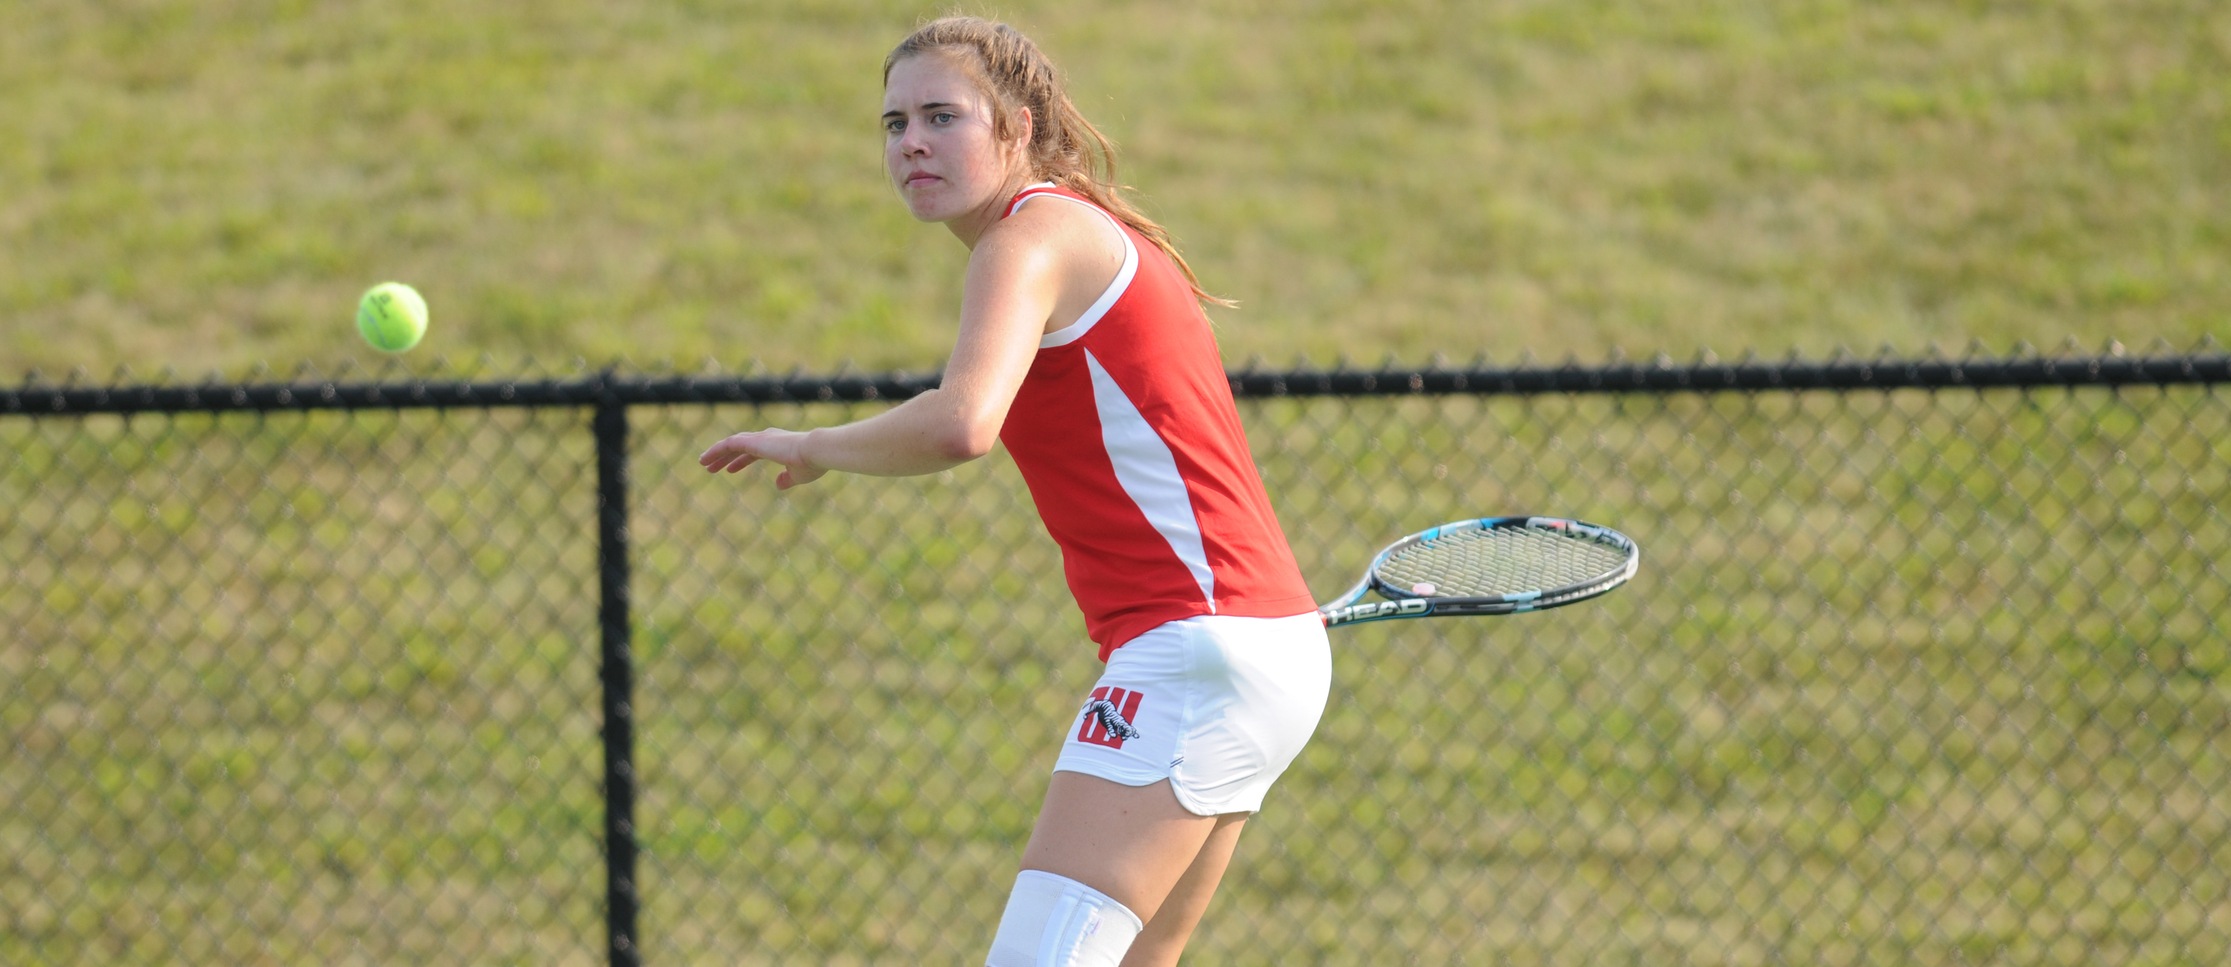 Tigers Fall to Gators 6-3 in NCAC Play